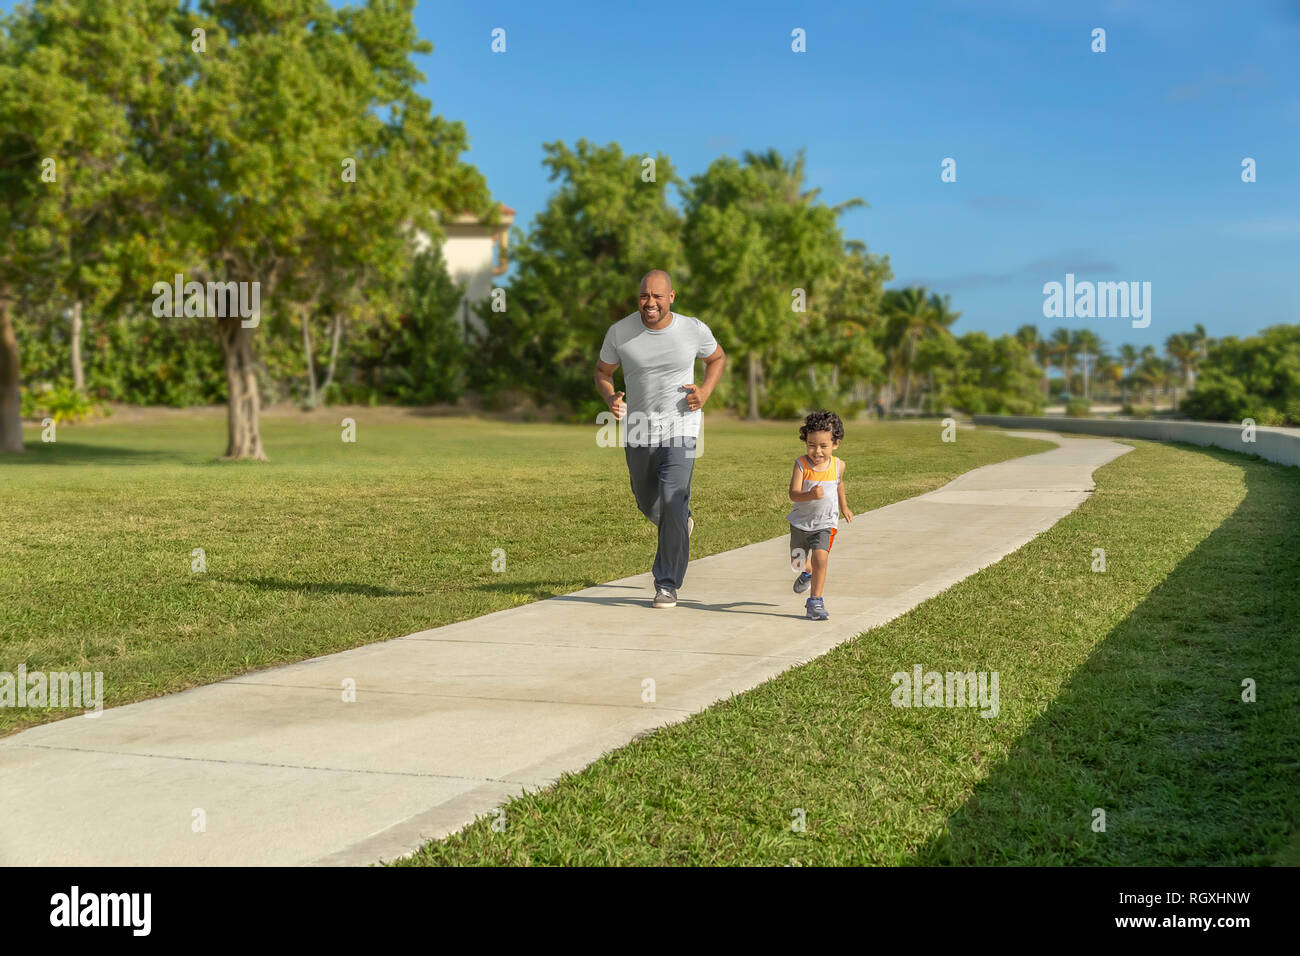 The son keeps up with his dad during a morning workout on a sunny day. The son keeps up with his dad during a morning workout on a sunny day. Stock Photo